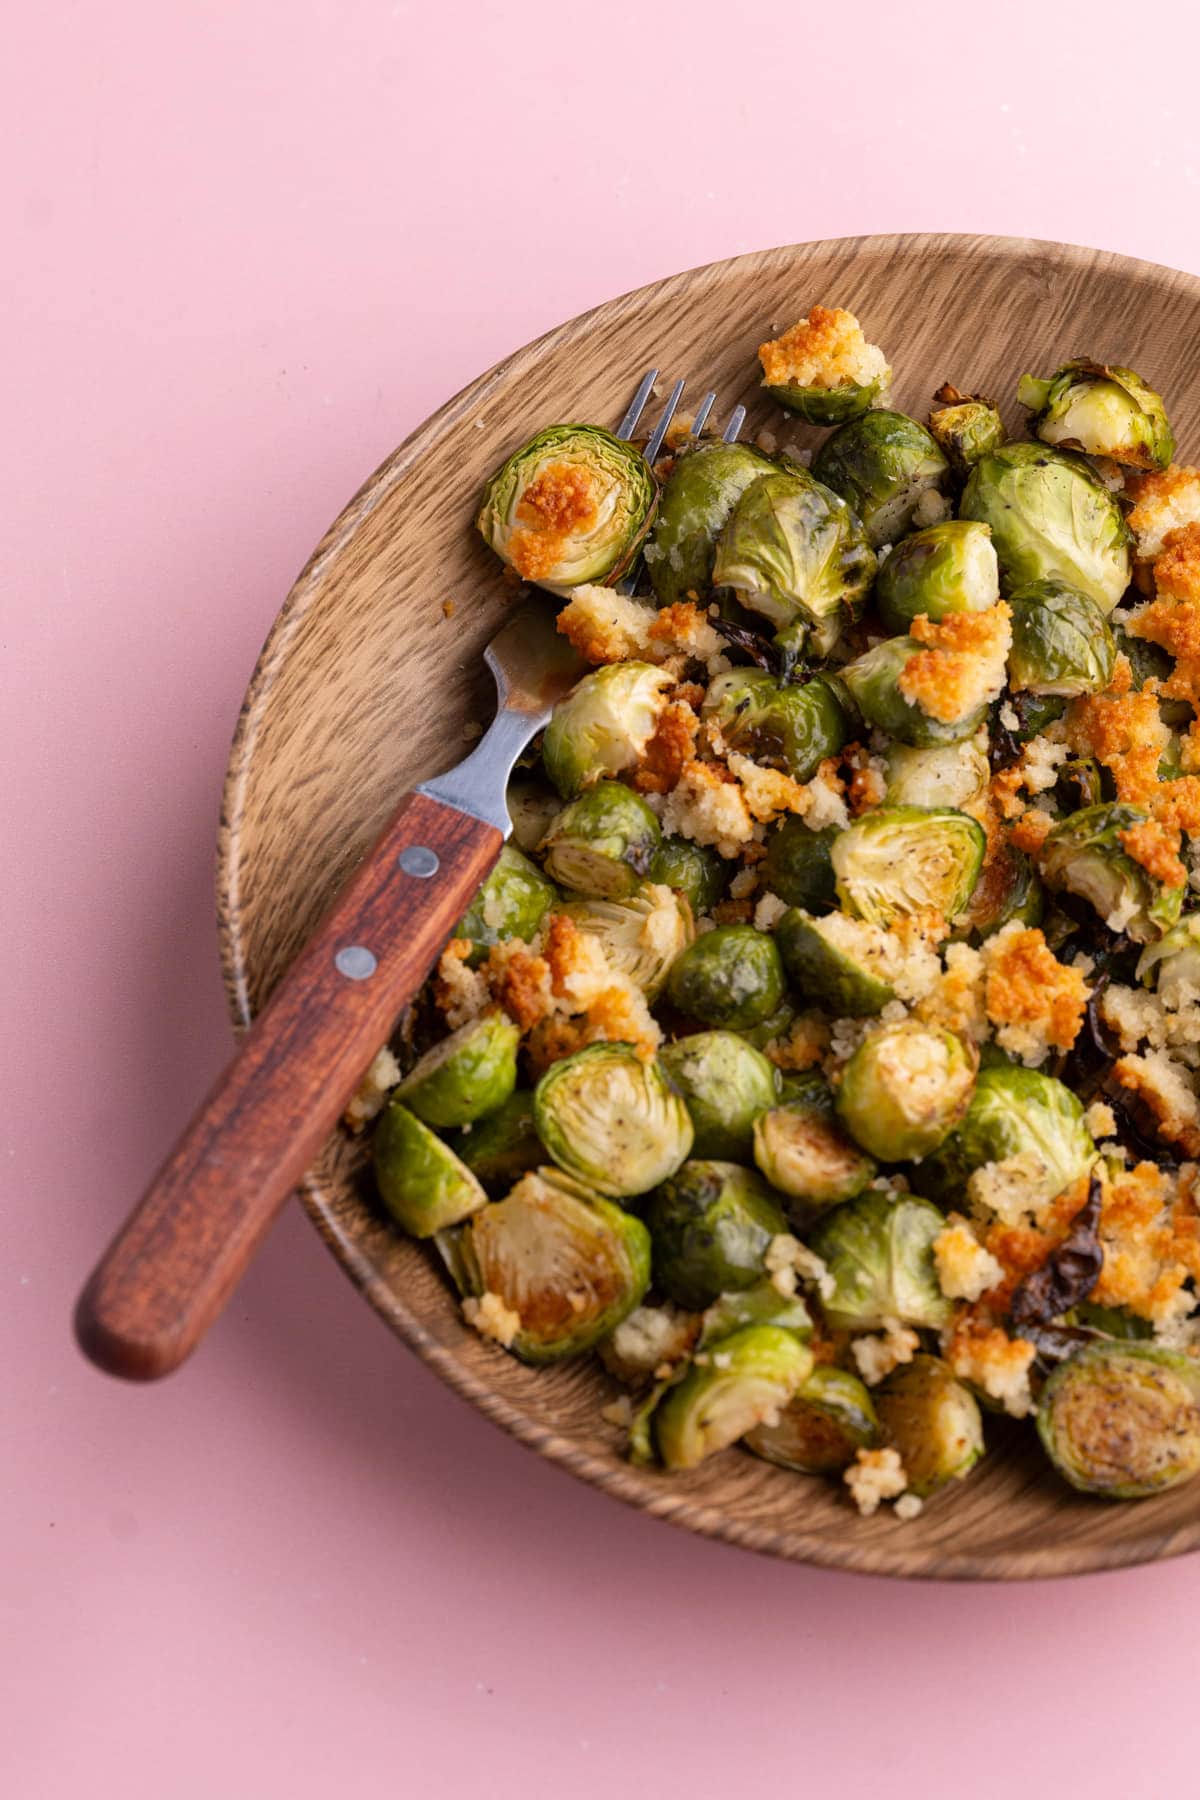 Parm Crusted Brussels Sprouts in a wooden bowl with a wooden serving fork.